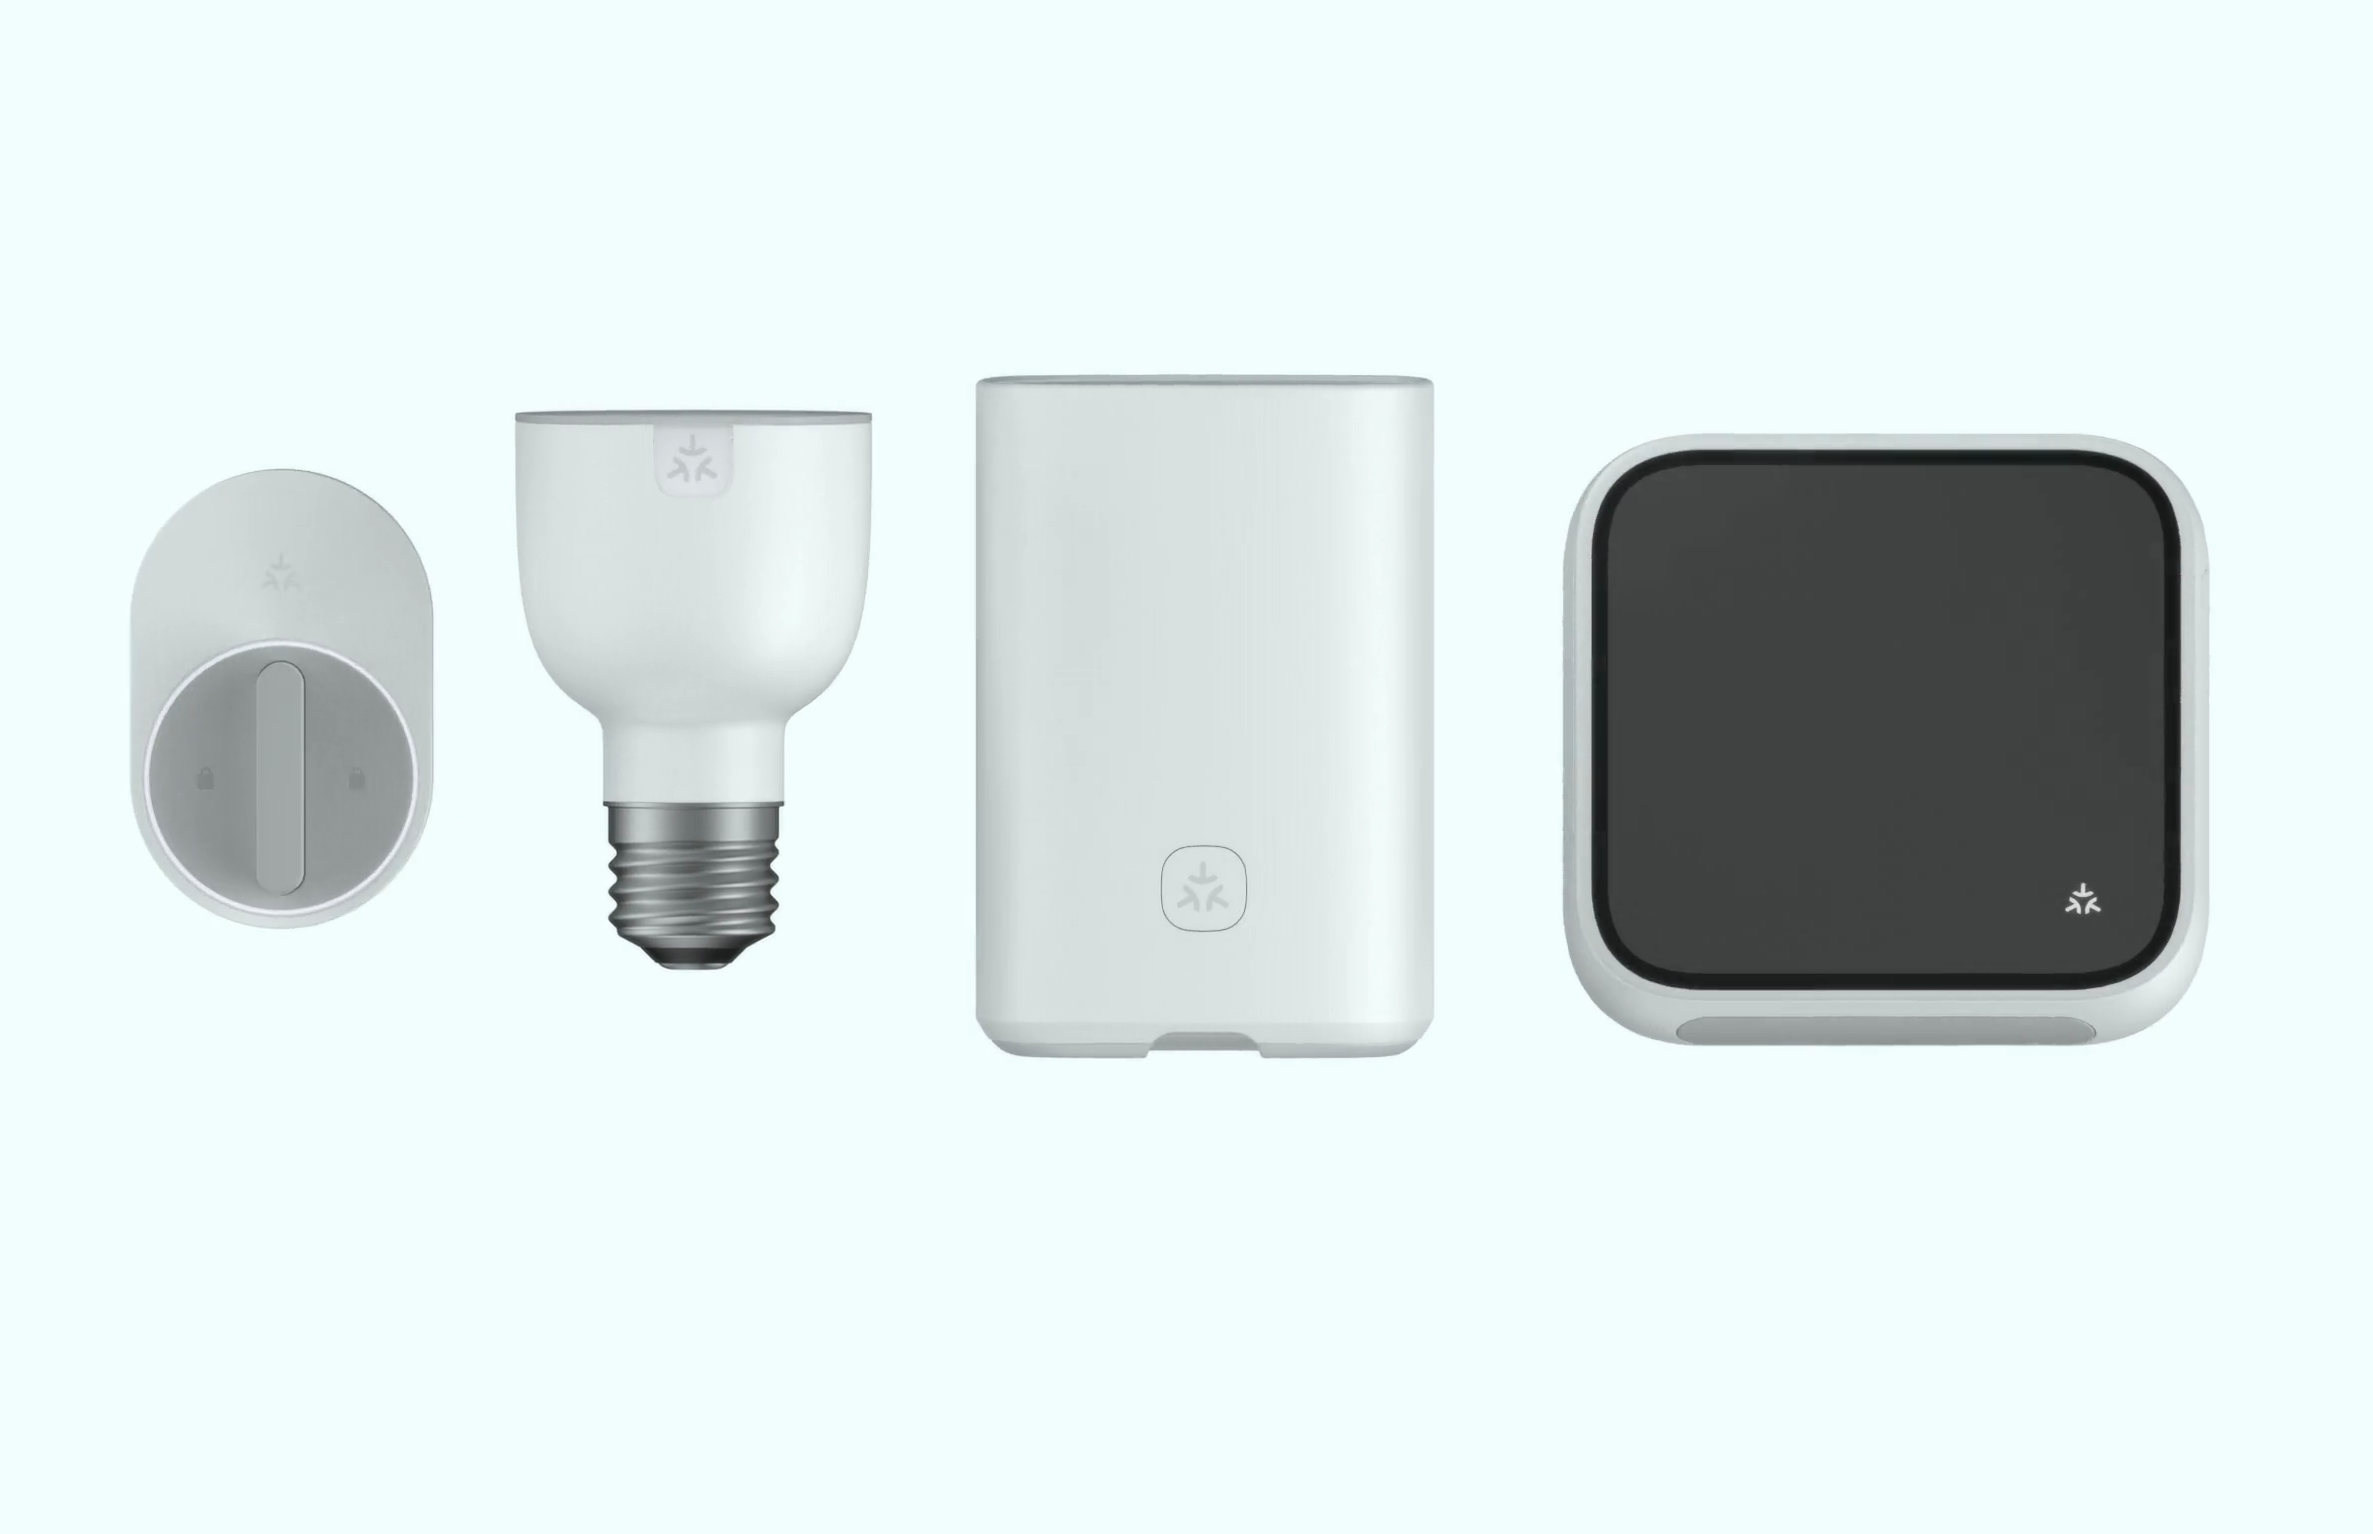 a lightbulb router screen and other smart home gadgets with the matter logo